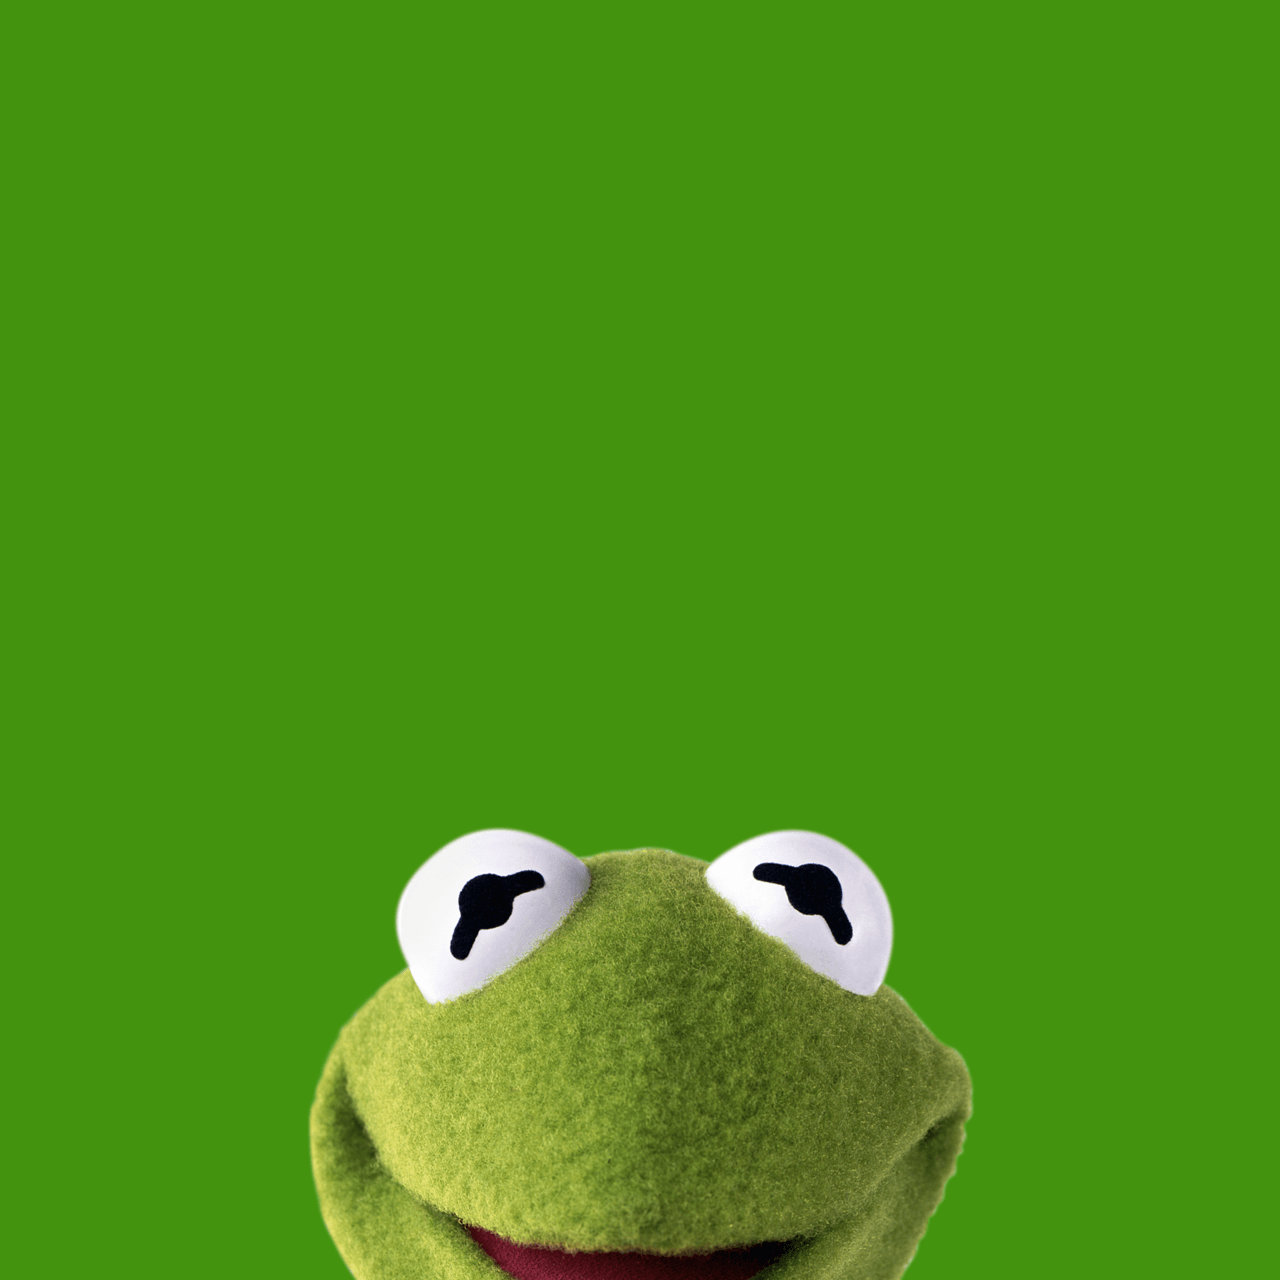 TheRetroInc on Etsy. Kermit, Frogs and Jim henson